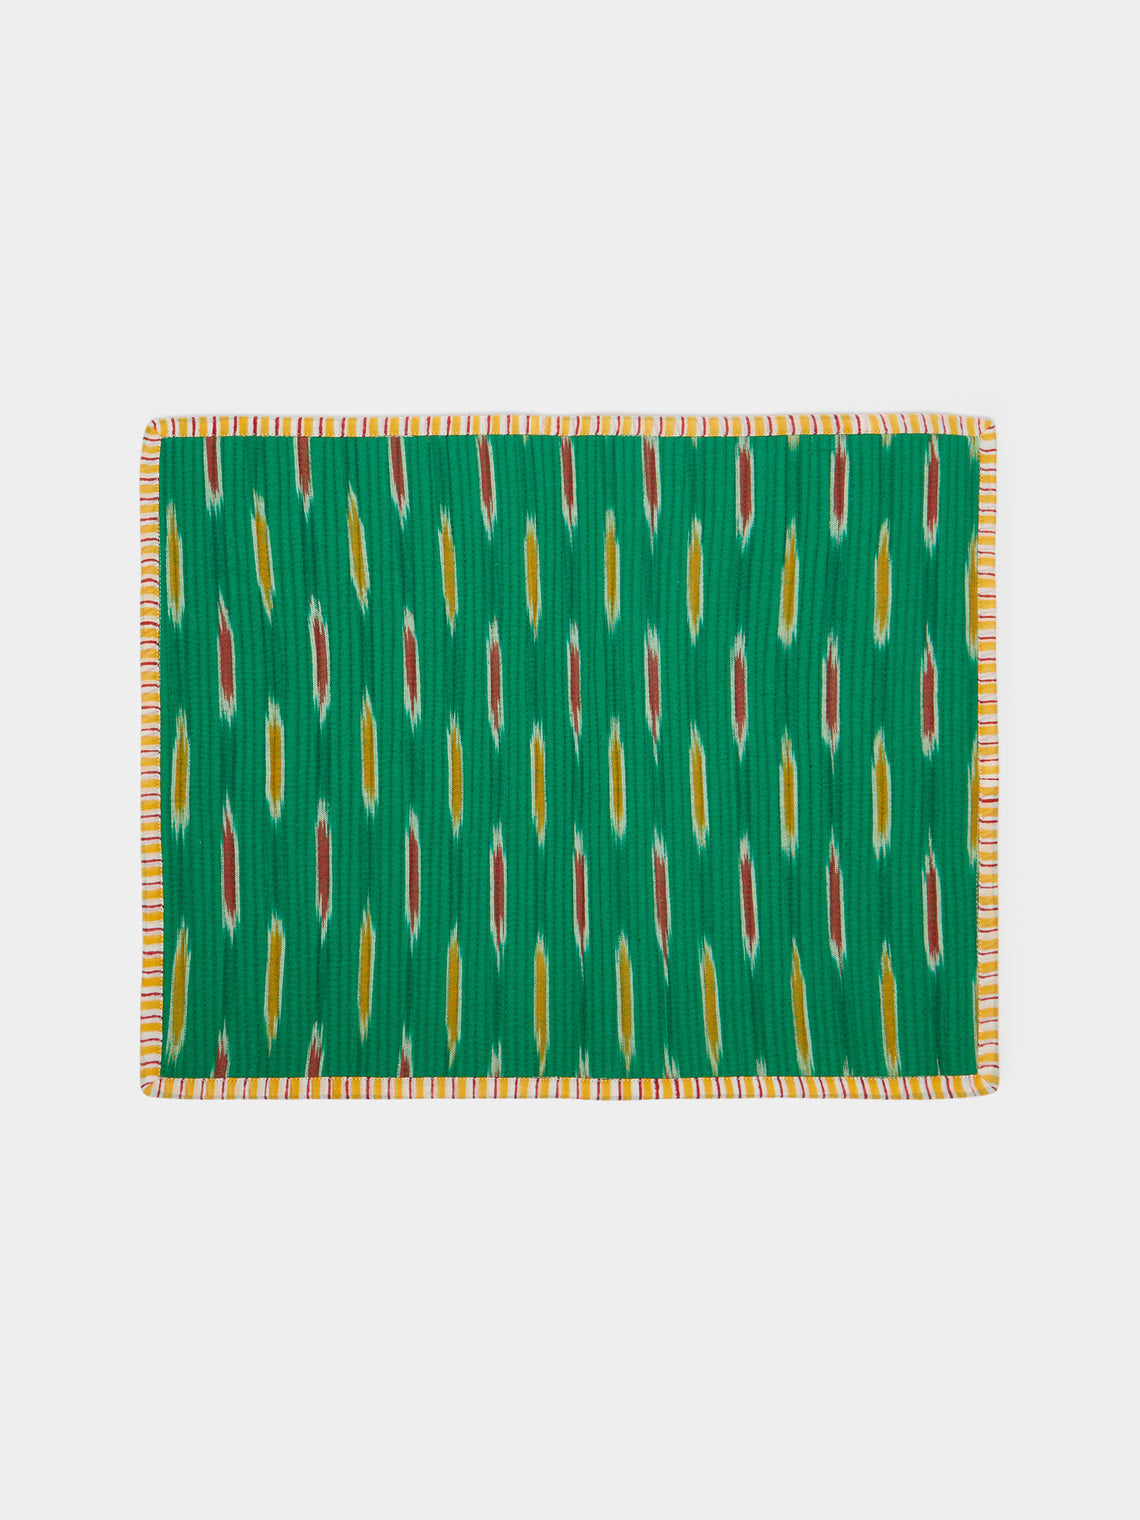 The Table Love - The Breakfast Handwoven Cotton Reversible Placemats (Set of 4) -  - ABASK - 